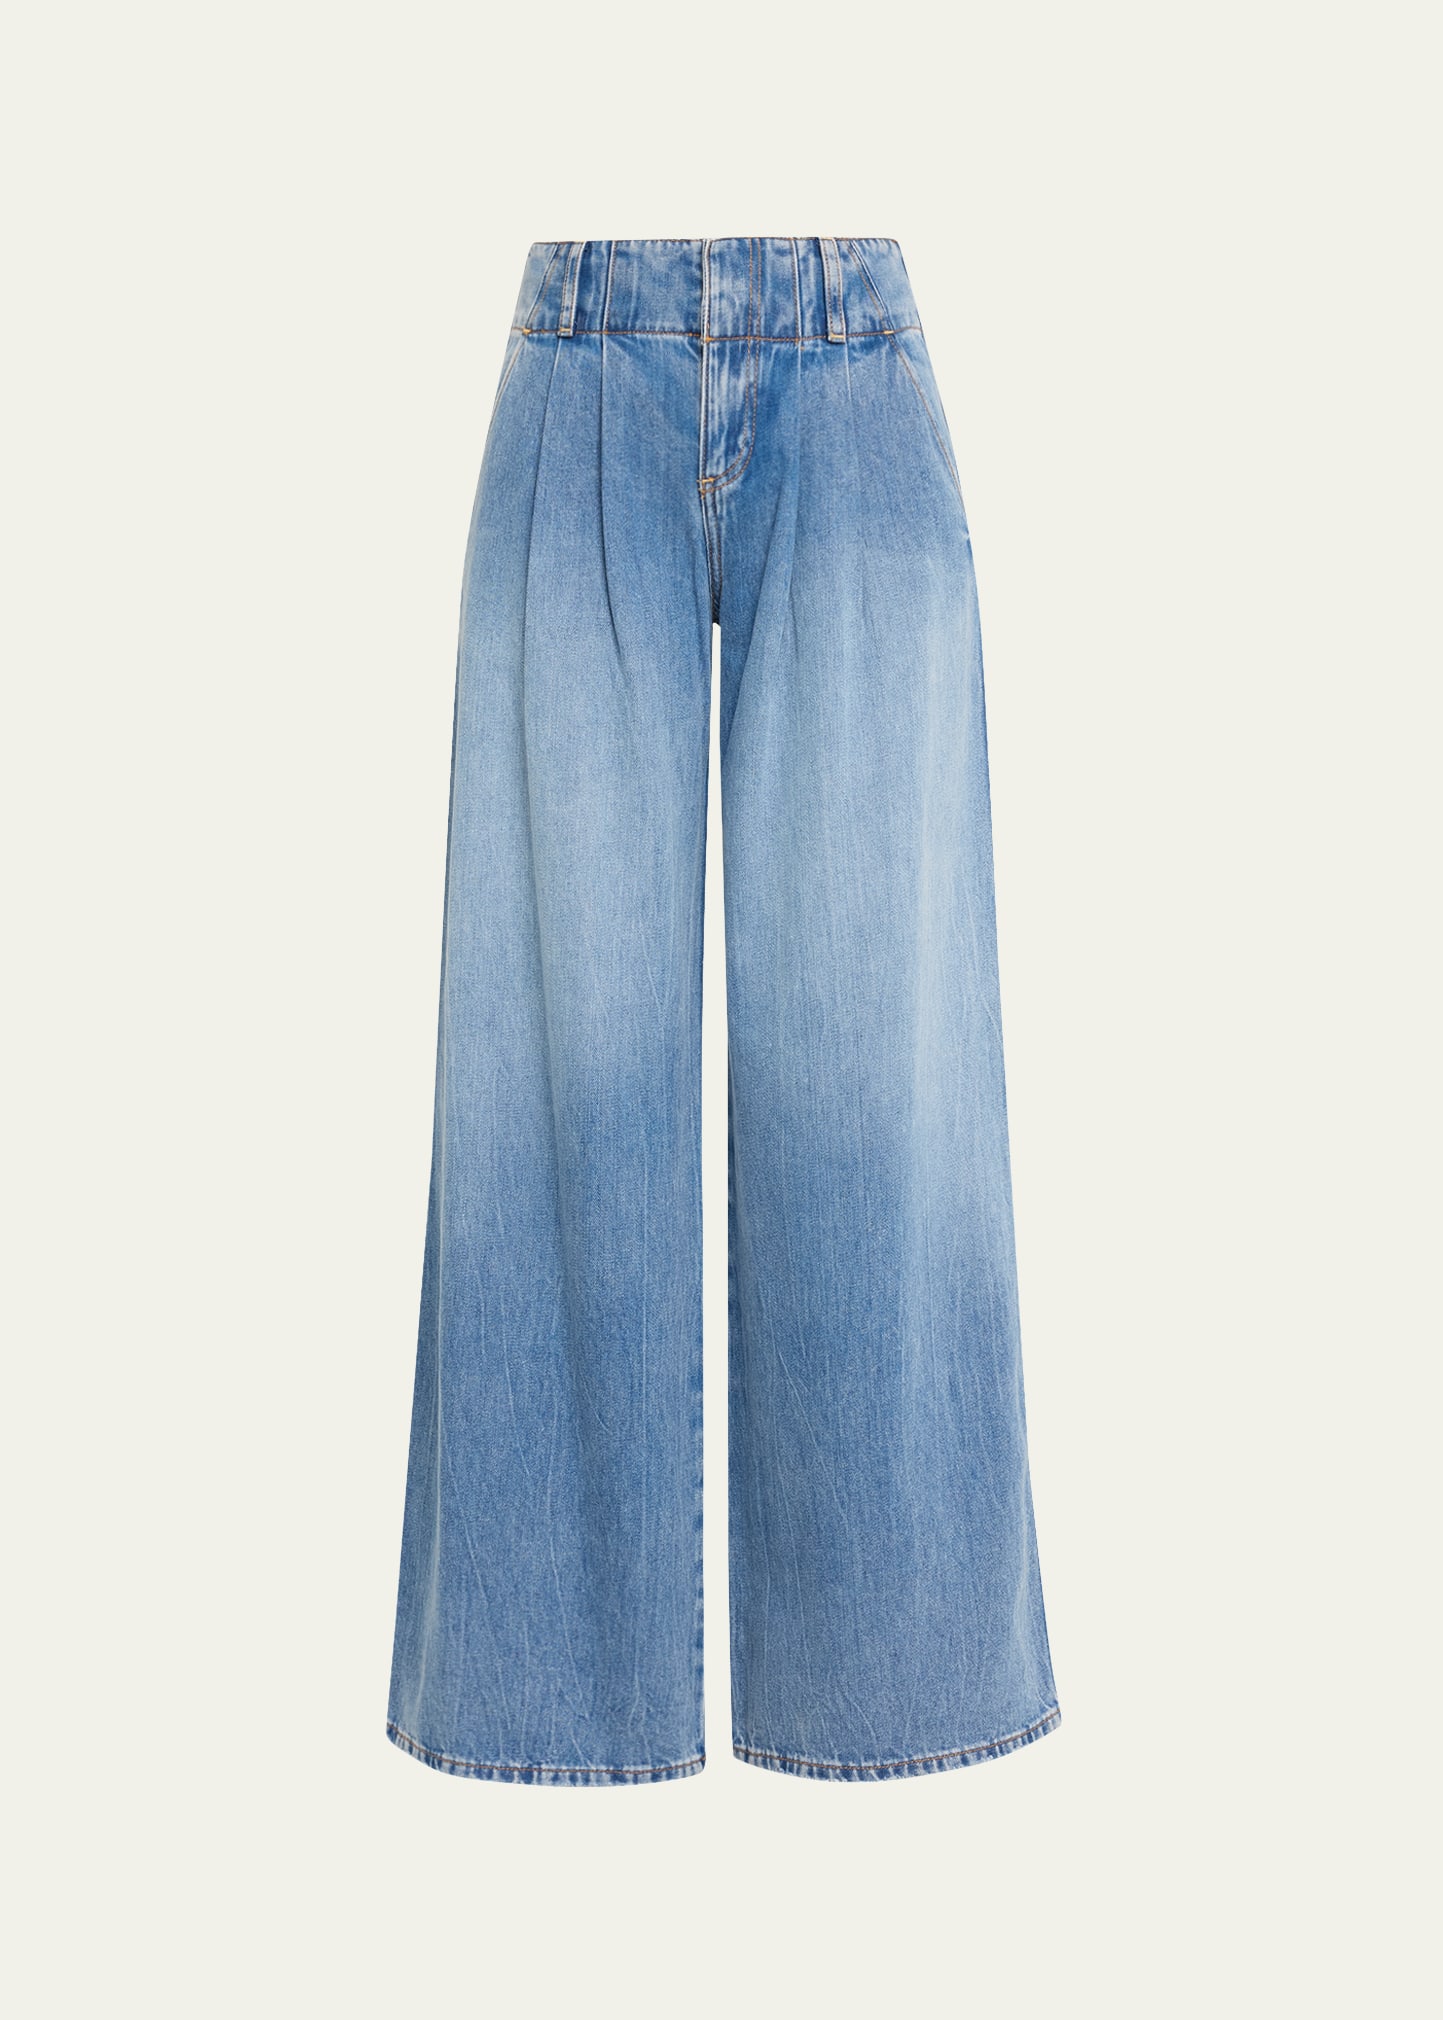 ALICE AND OLIVIA ANDERS LOW-RISE WIDE-LEG DOUBLE-PLEATED JEANS